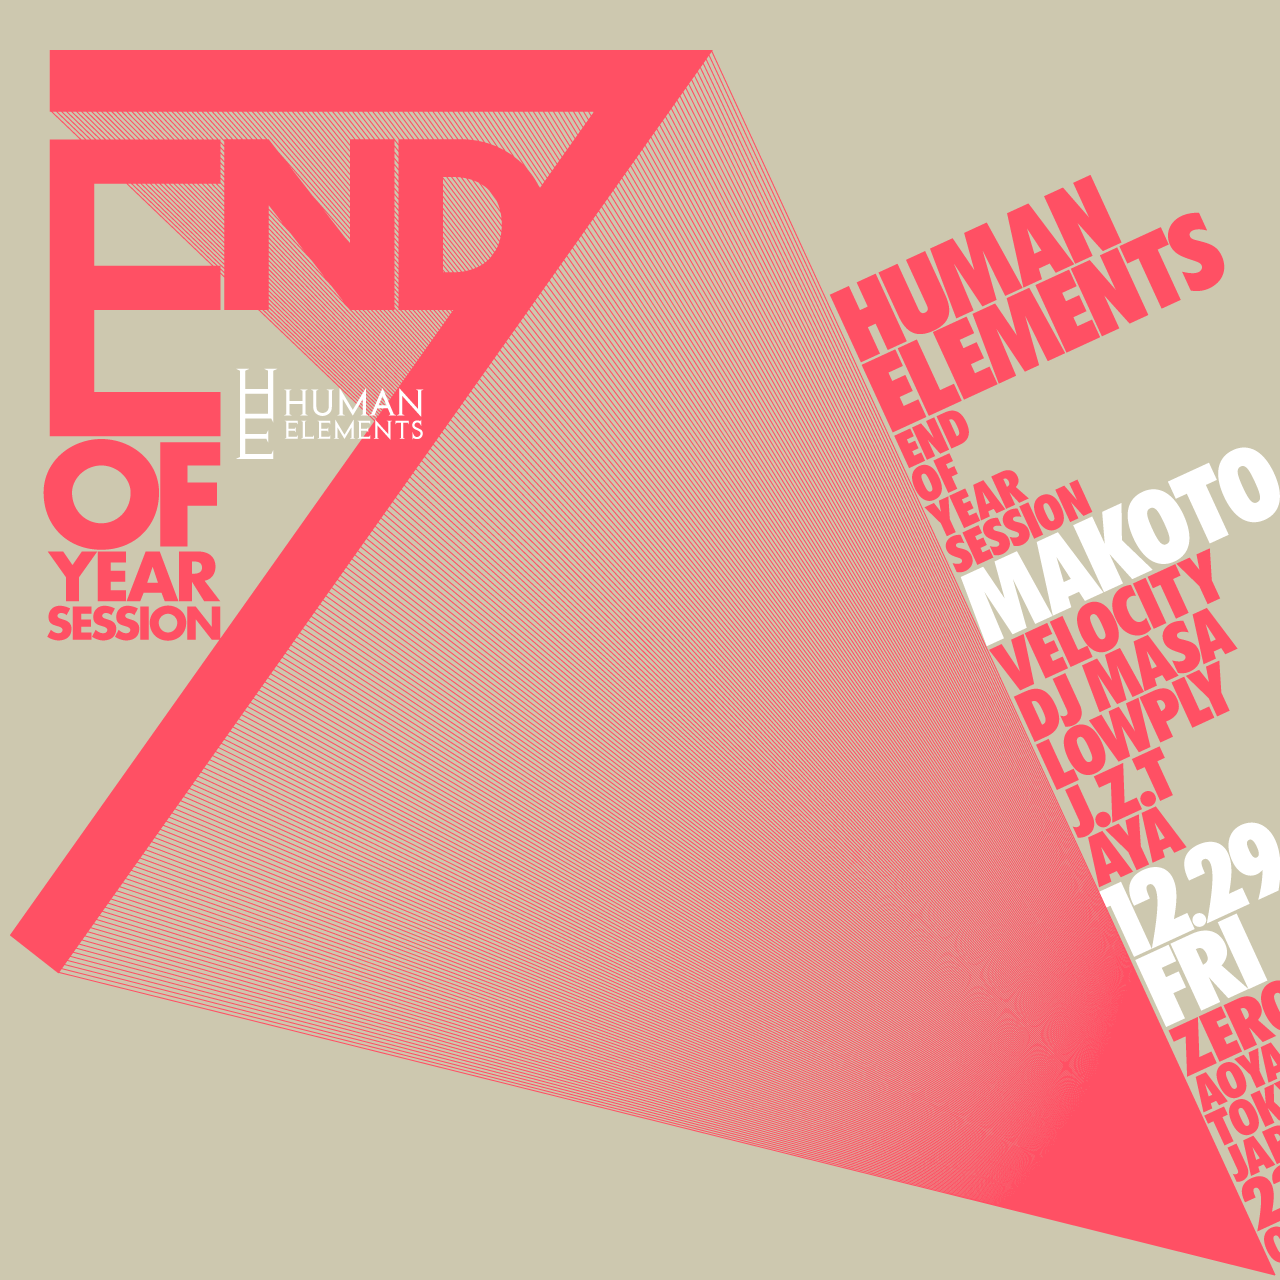 Human Elements “End of Year Session”